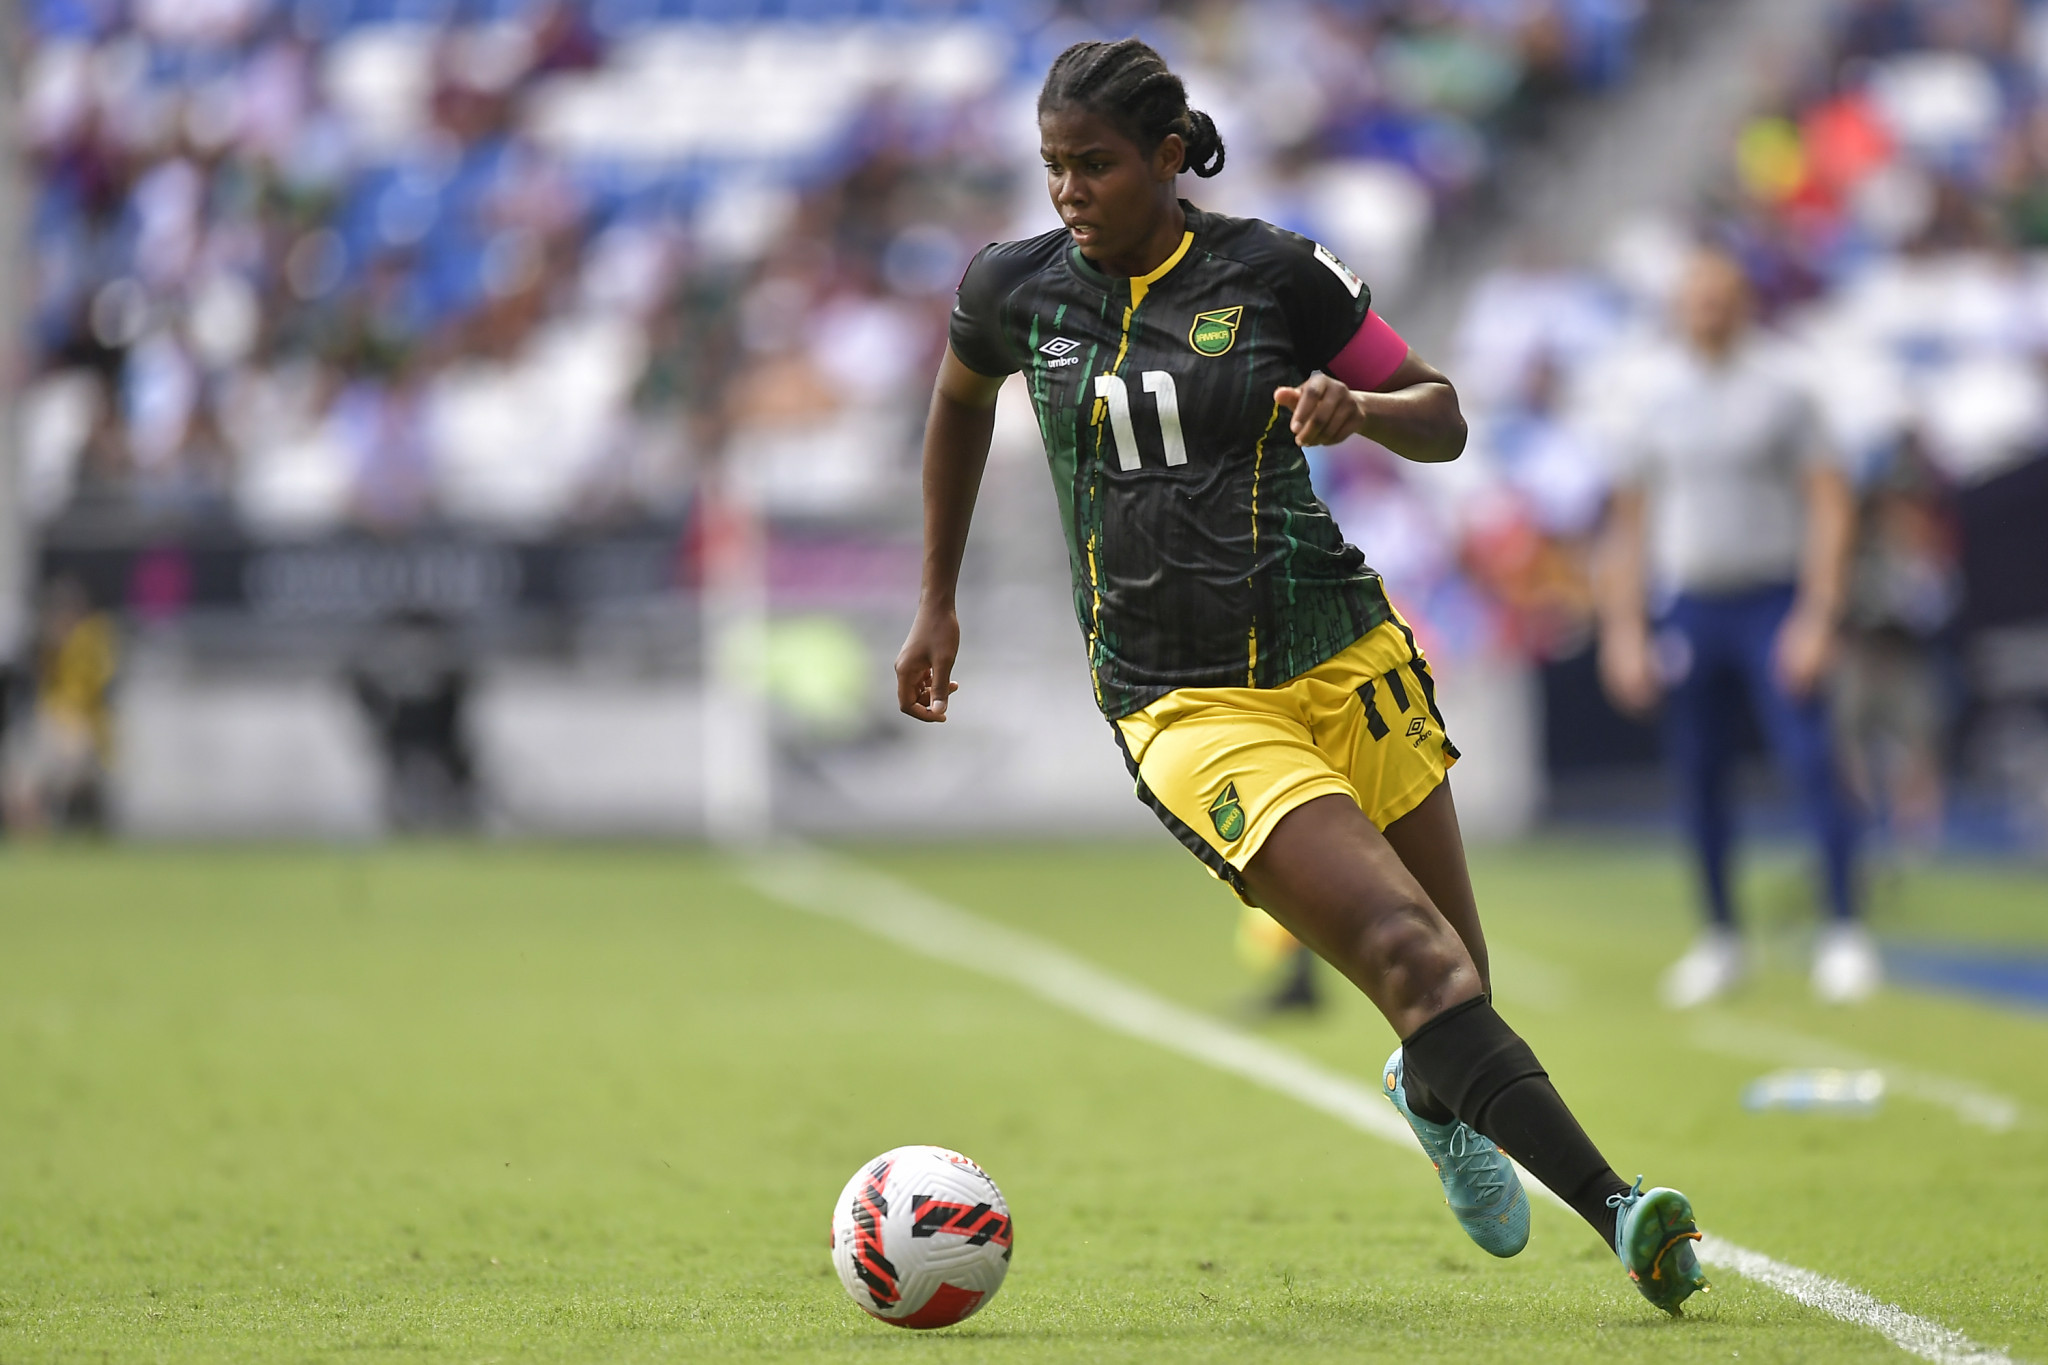 Khadija Shaw scored twice for Jamaica in their 4-0 win against Haiti in their final group match ©Getty Images